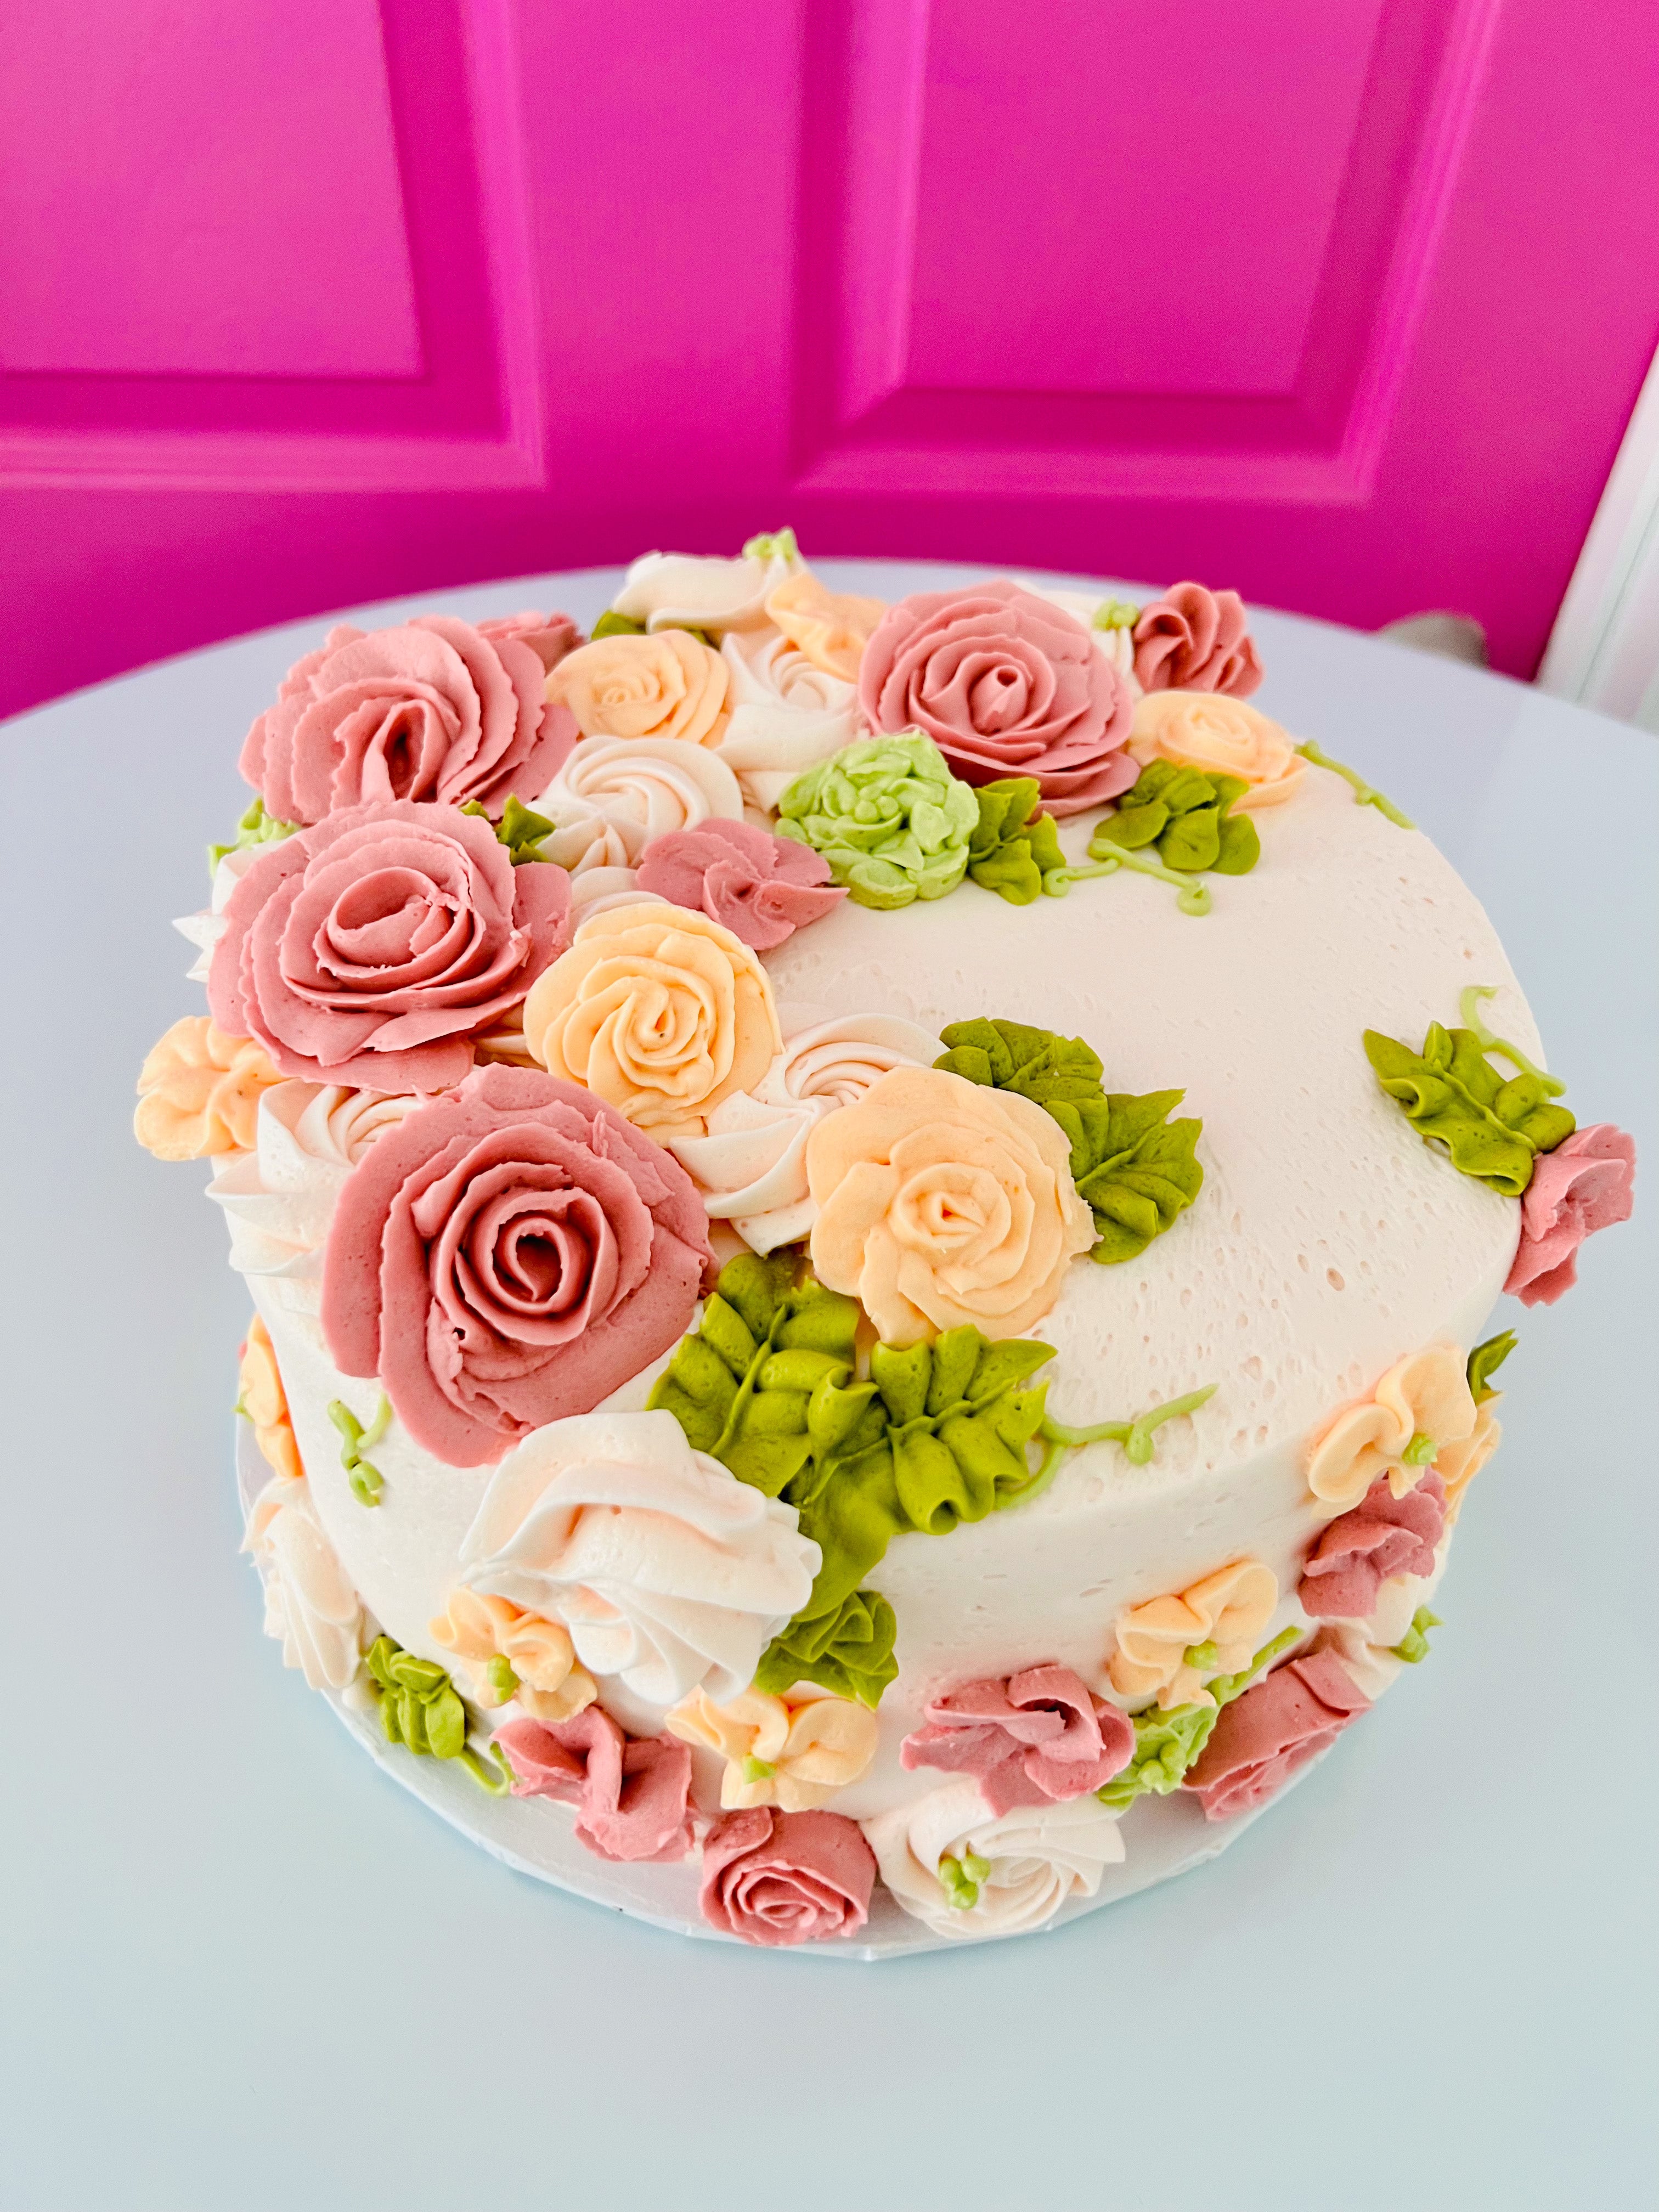 Cake delivery in New York | Birthday cake delivery, Online cake delivery,  Cake delivery